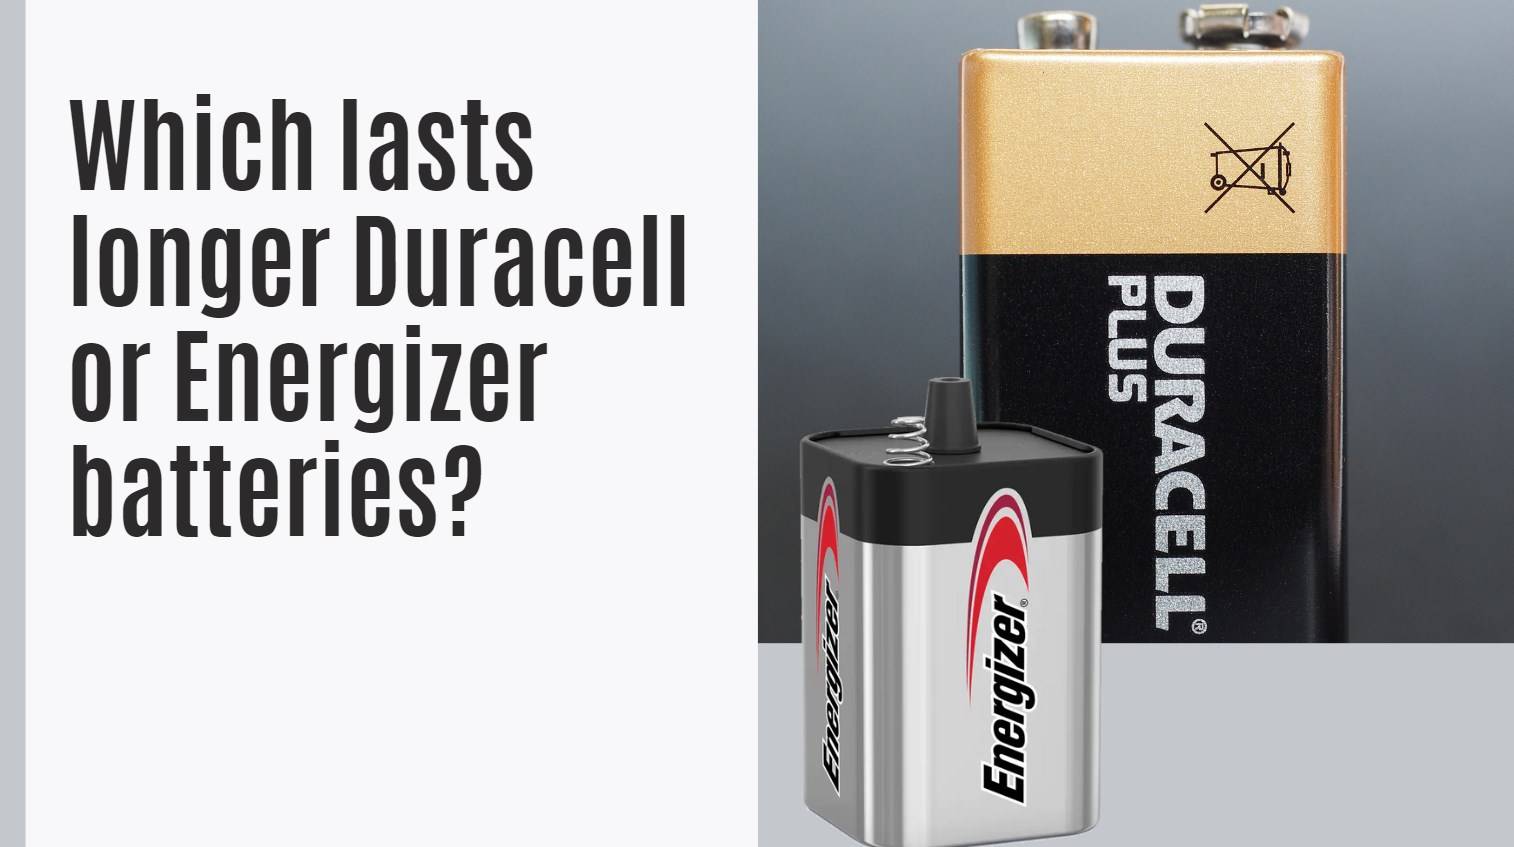 Which lasts longer Duracell or Energizer batteries?